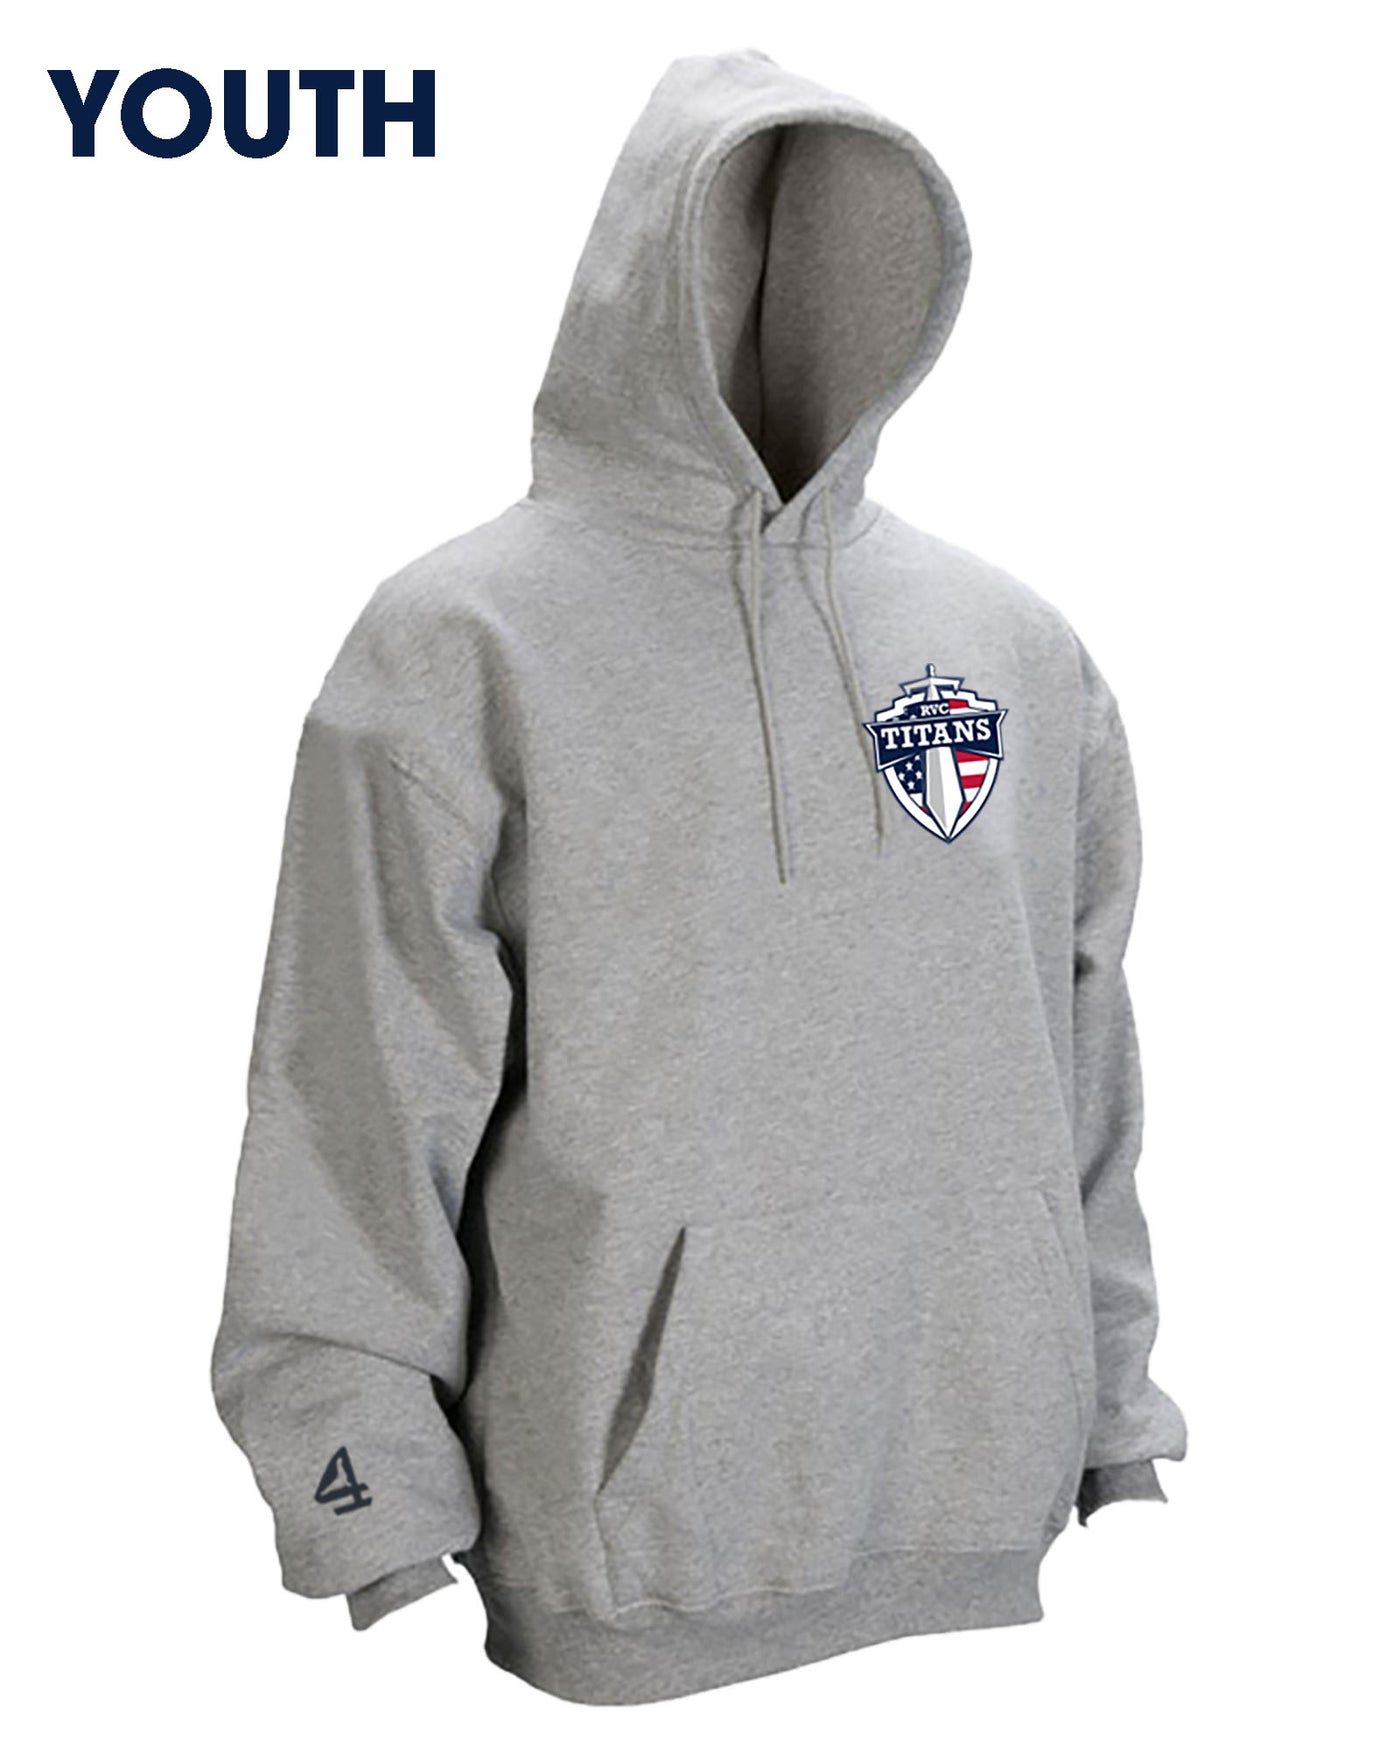 YOUTH Titans Football Flag Hoodie Design